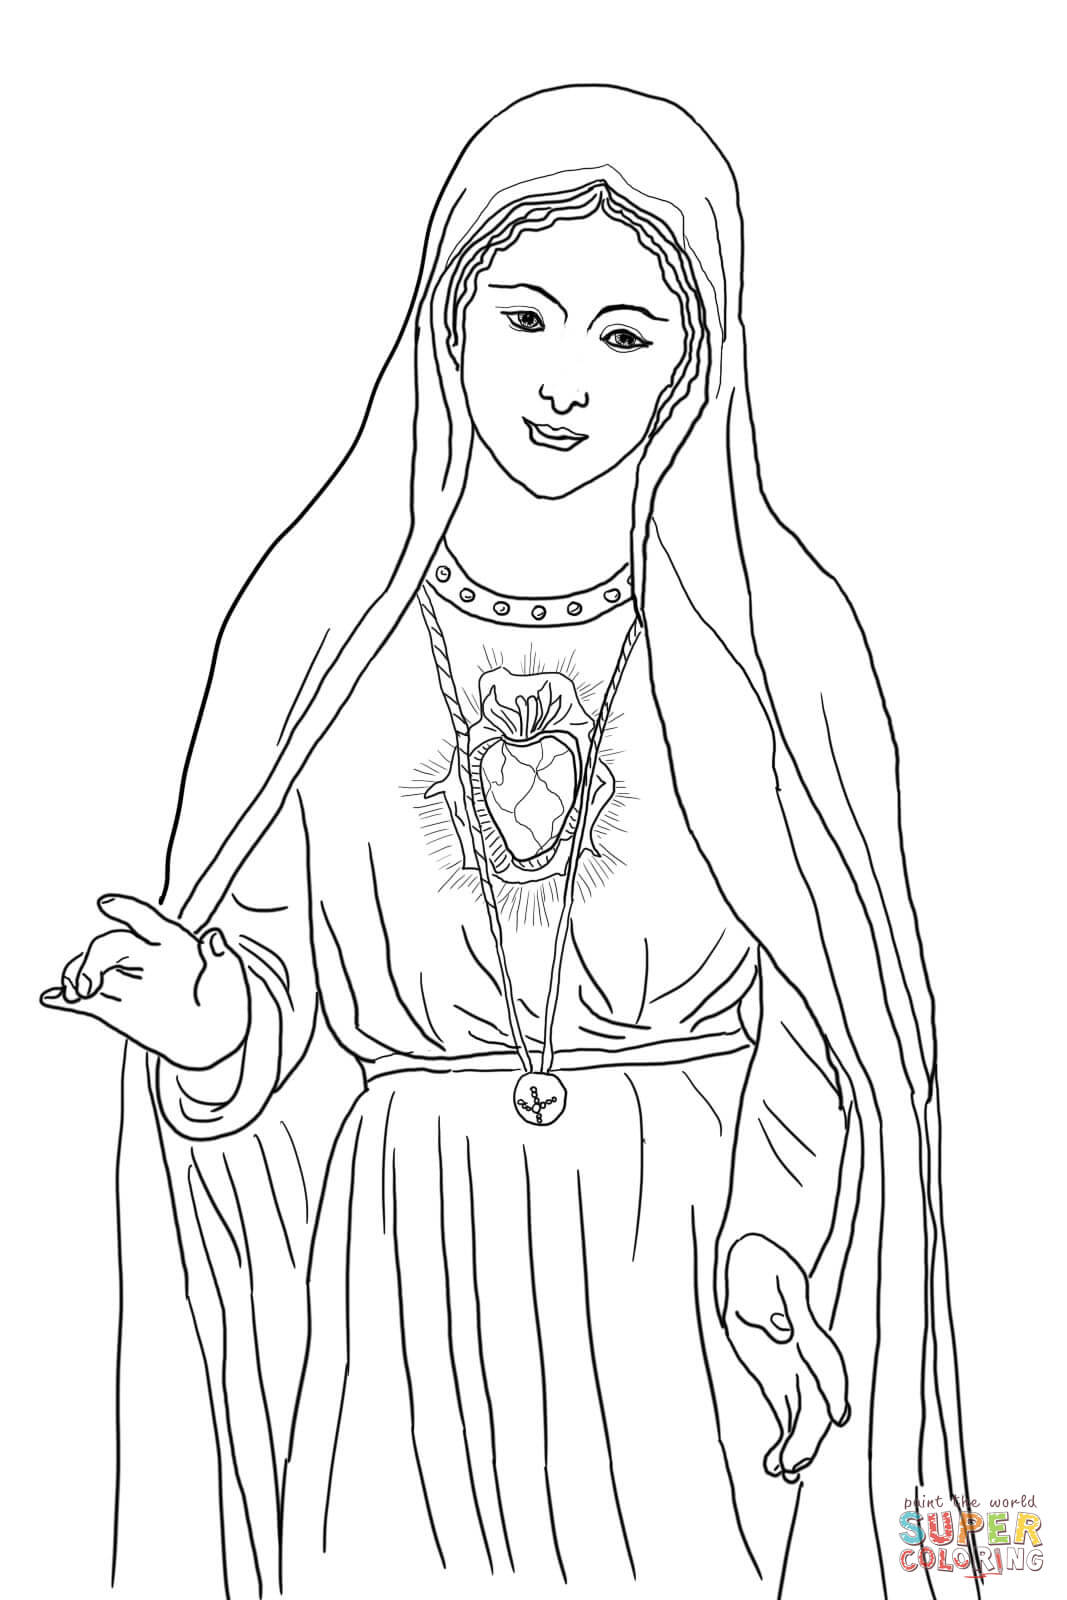 Immaculate Heart of Mary coloring page | Free Printable Coloring Pages